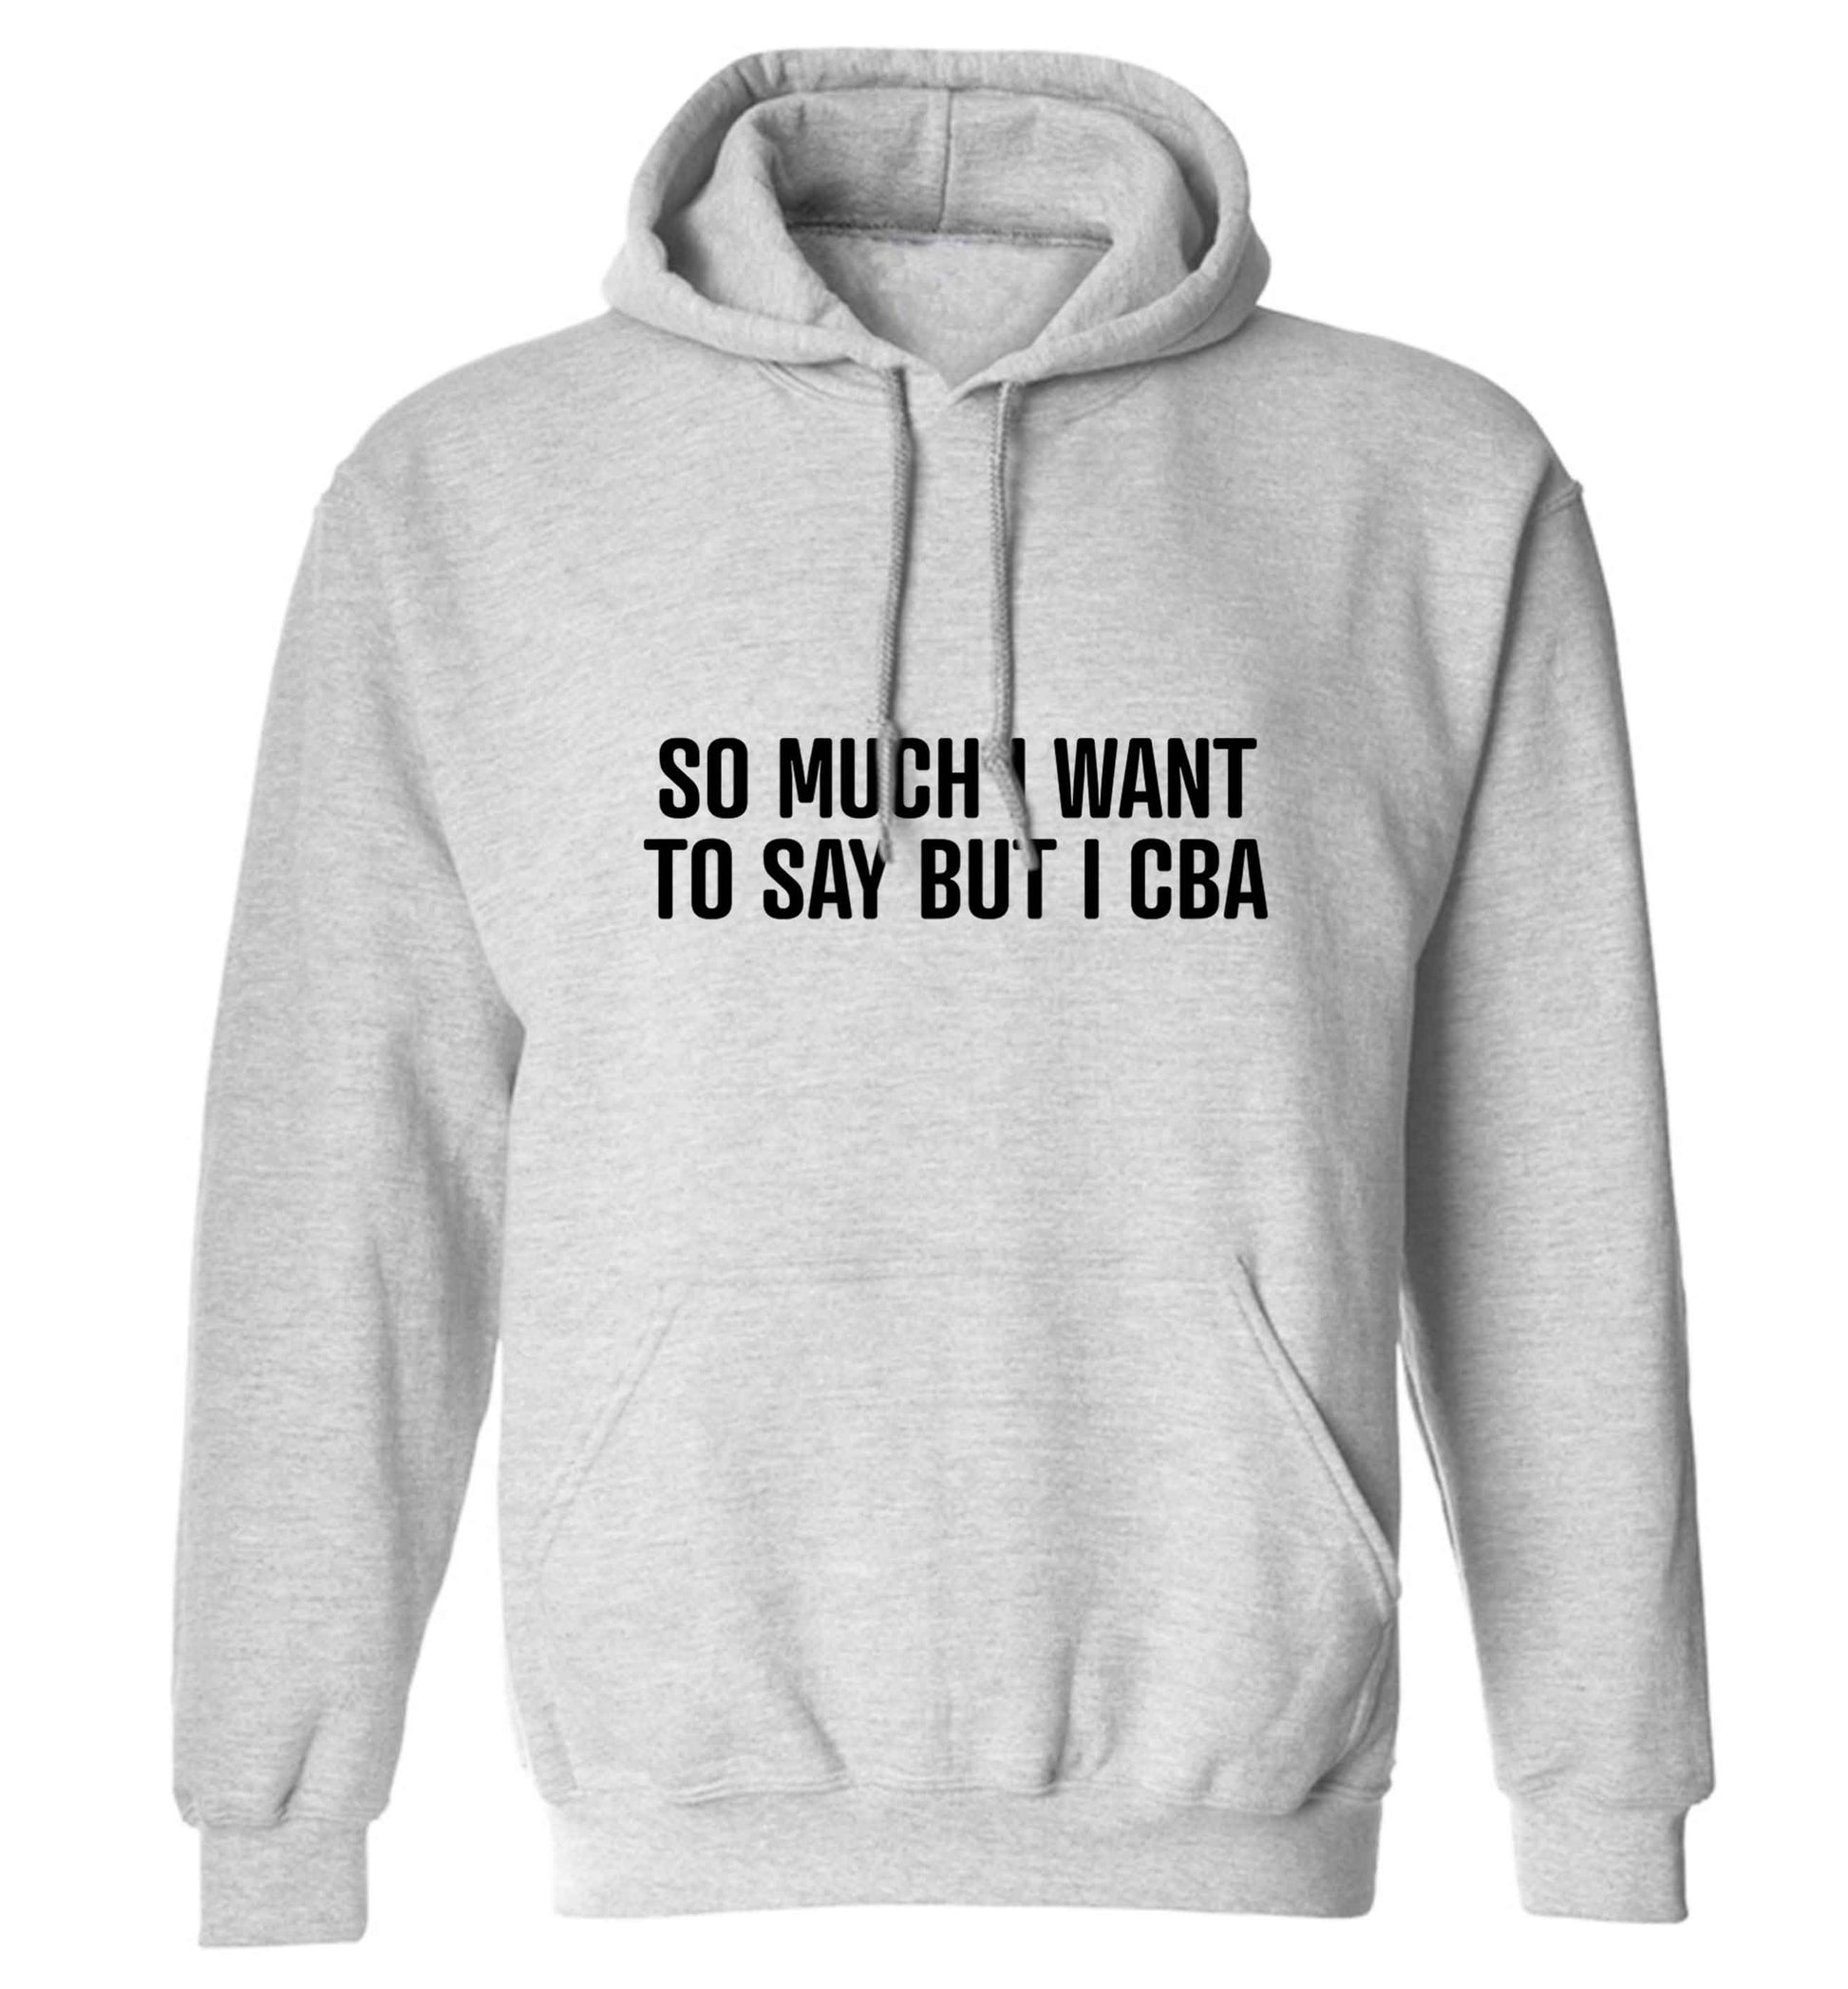 So much I want to say I cba  adults unisex grey hoodie 2XL